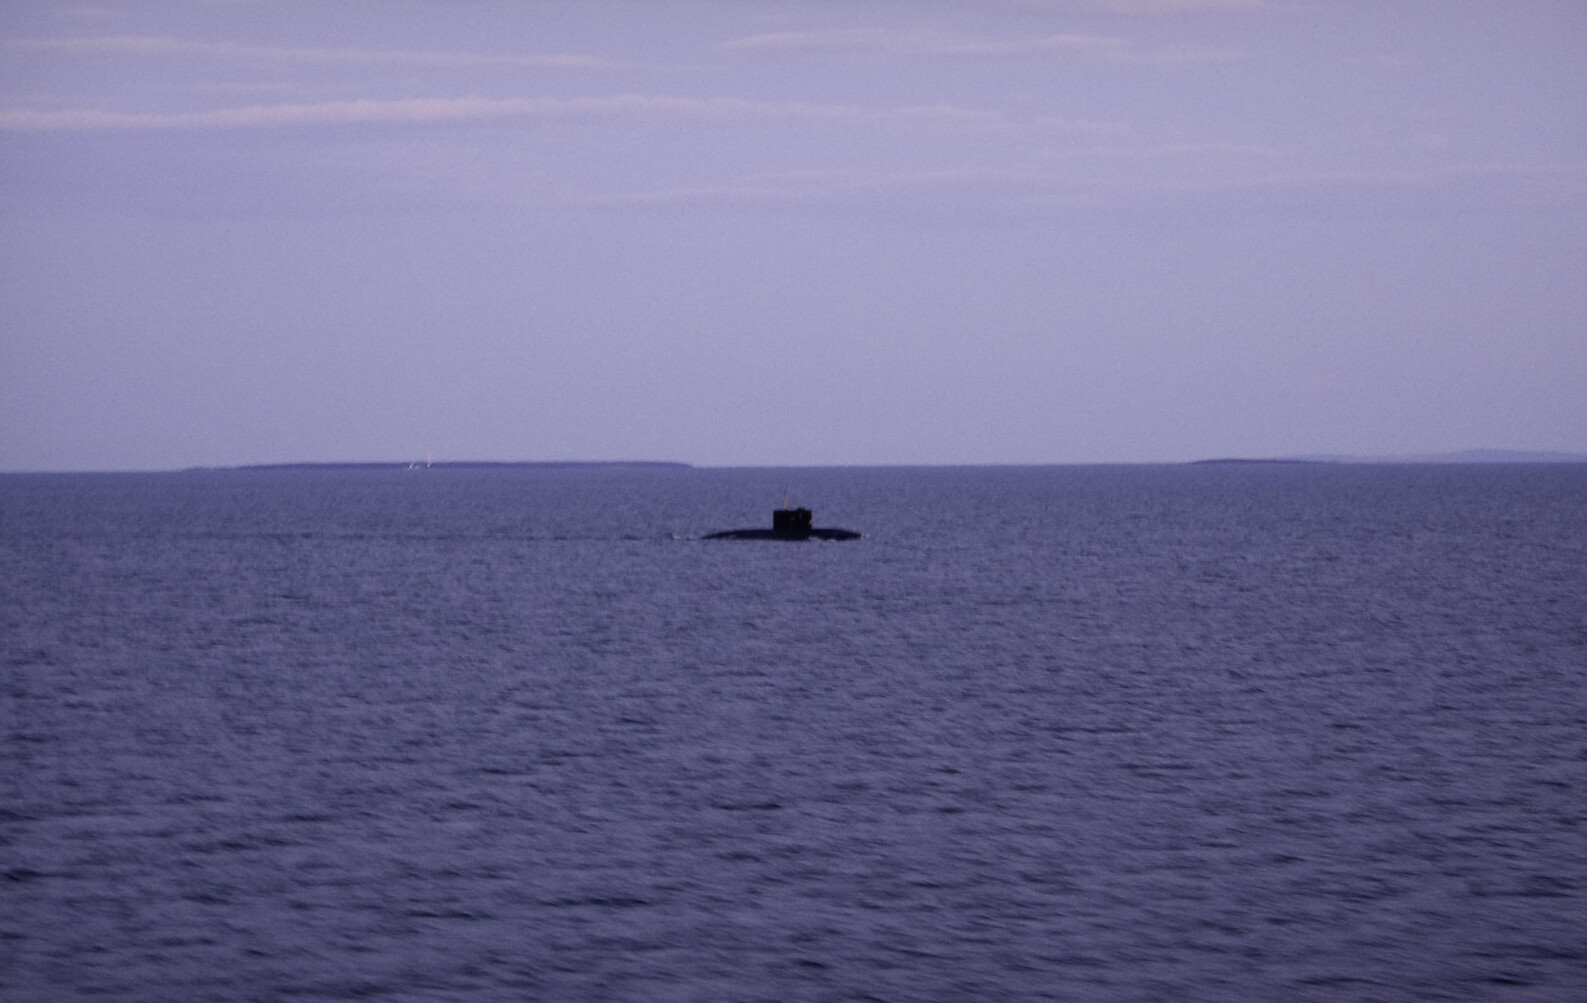 "Russian Sub" by fhwrdh is licensed under CC BY 2.0.